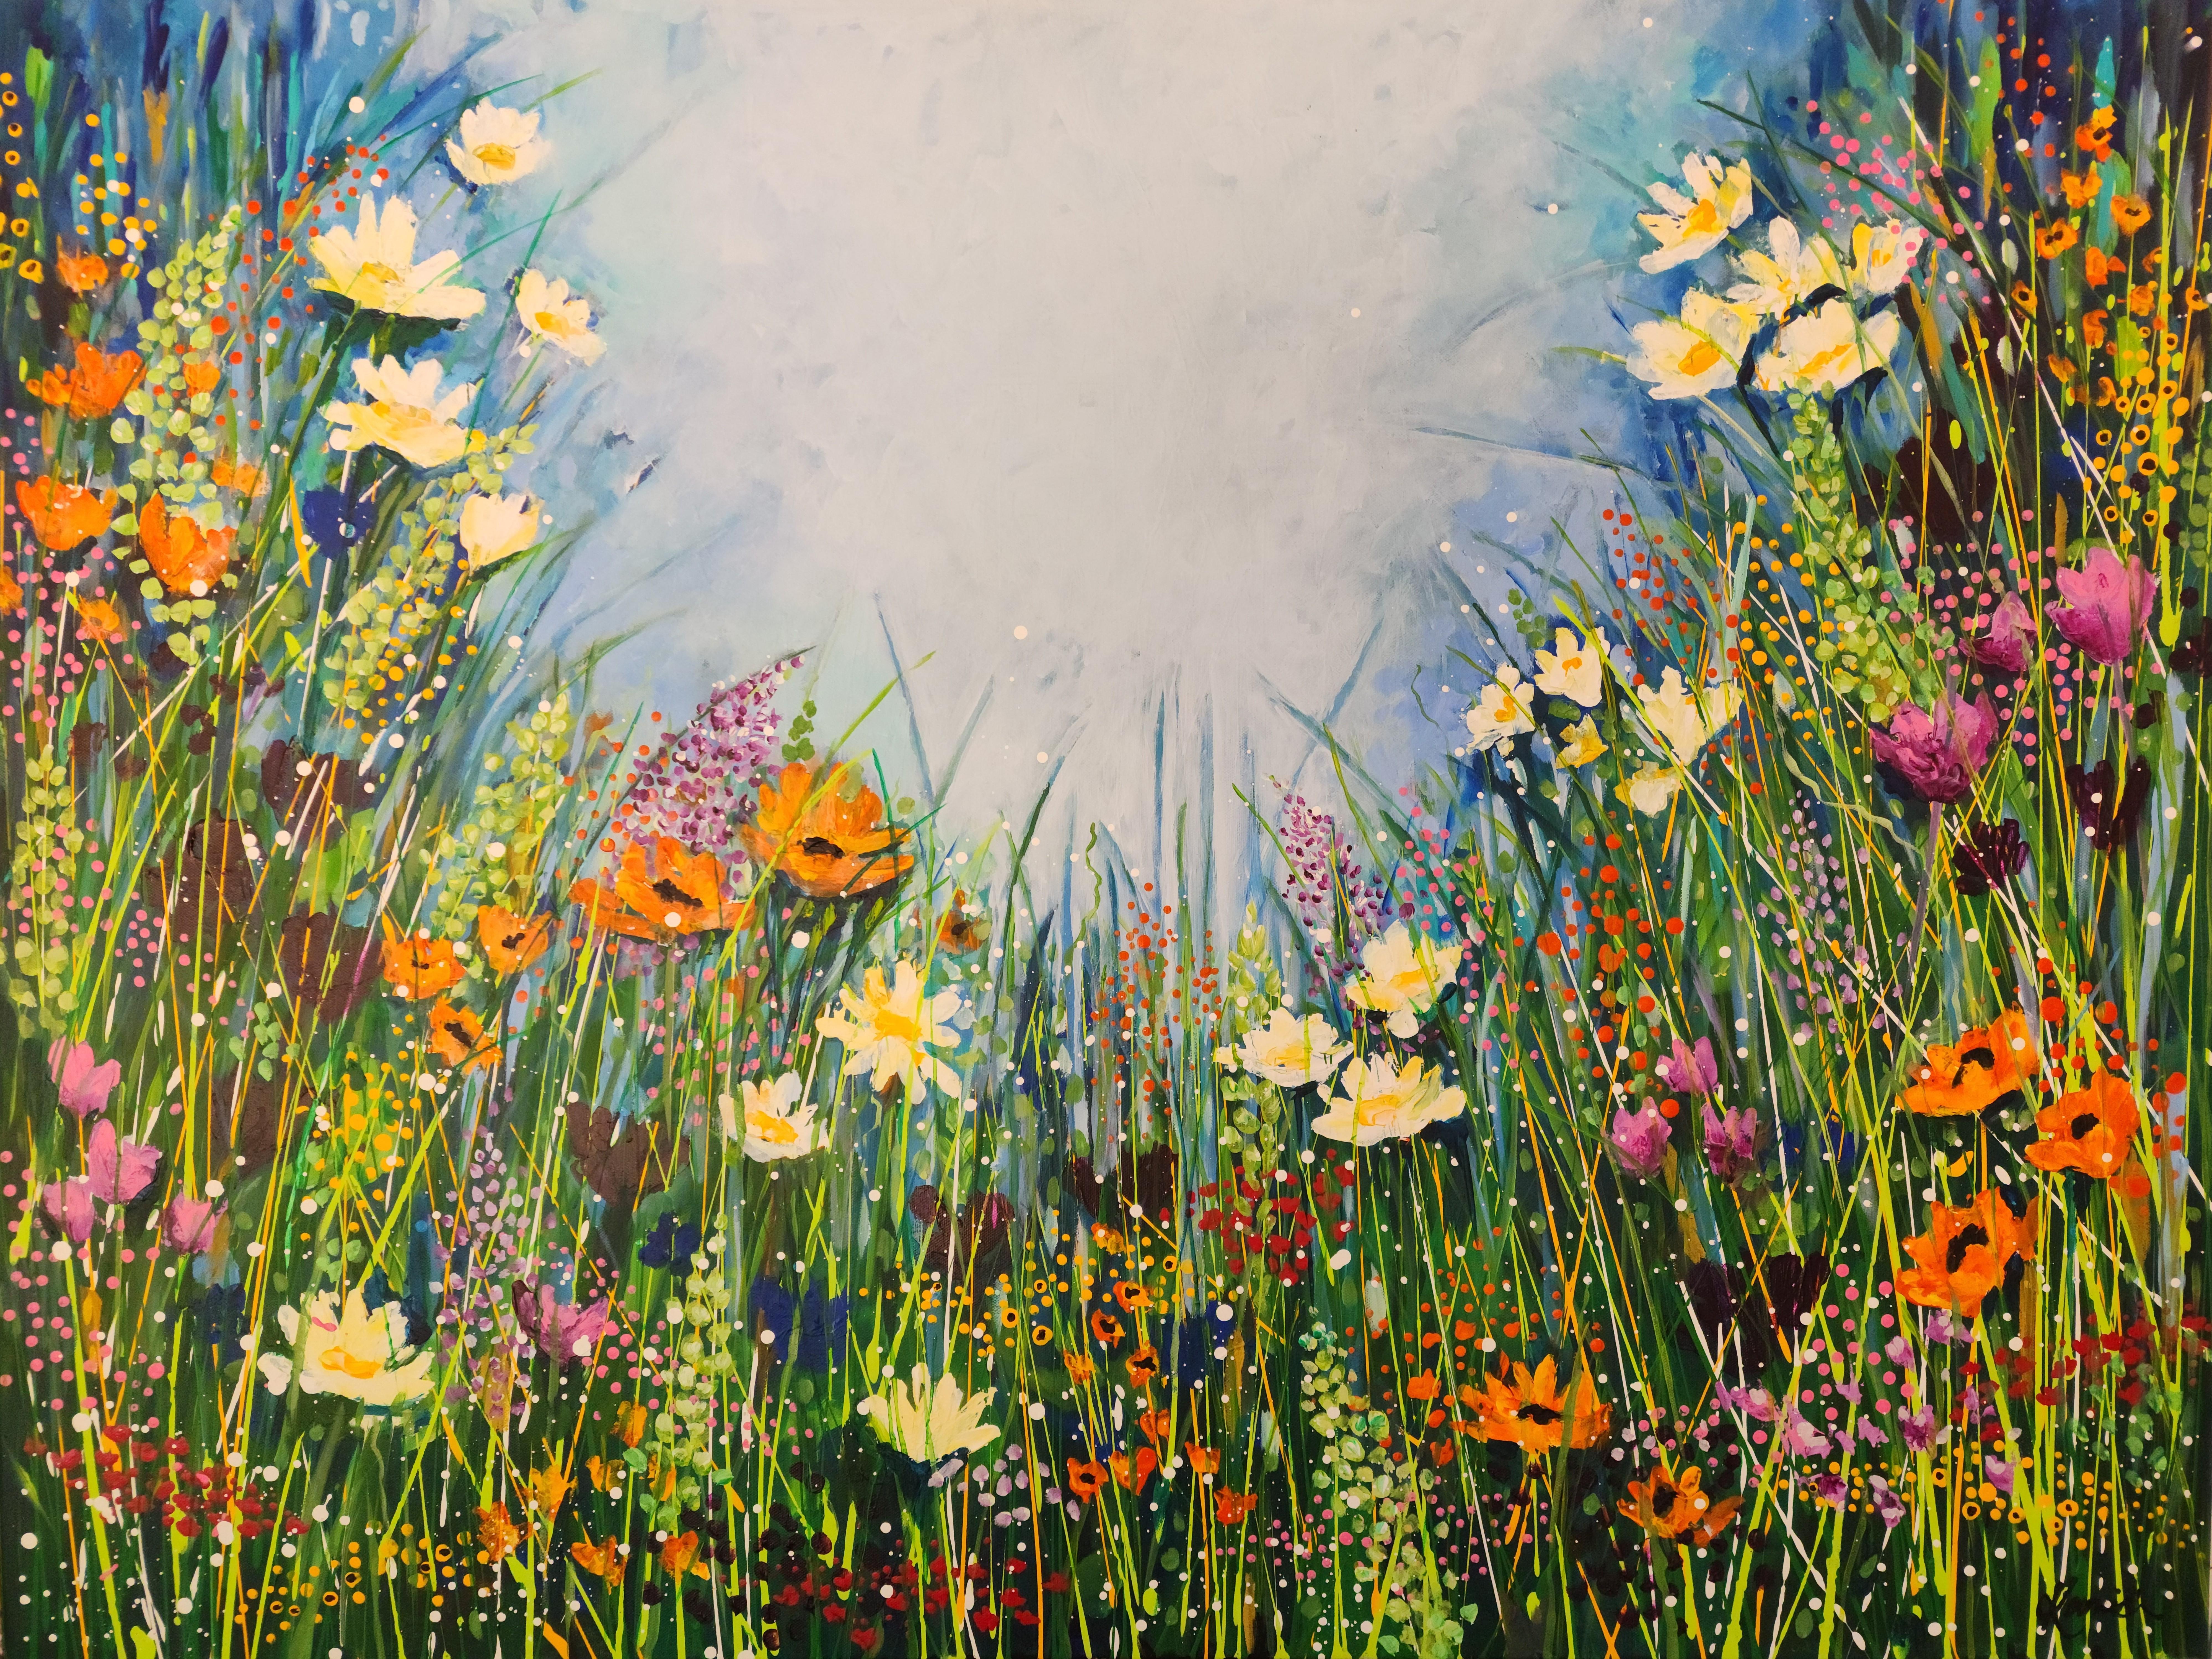 Karnish Art Abstract Painting - In flower fields of Dreams - Nature Meadow Stillness Beauty Contemporary Color